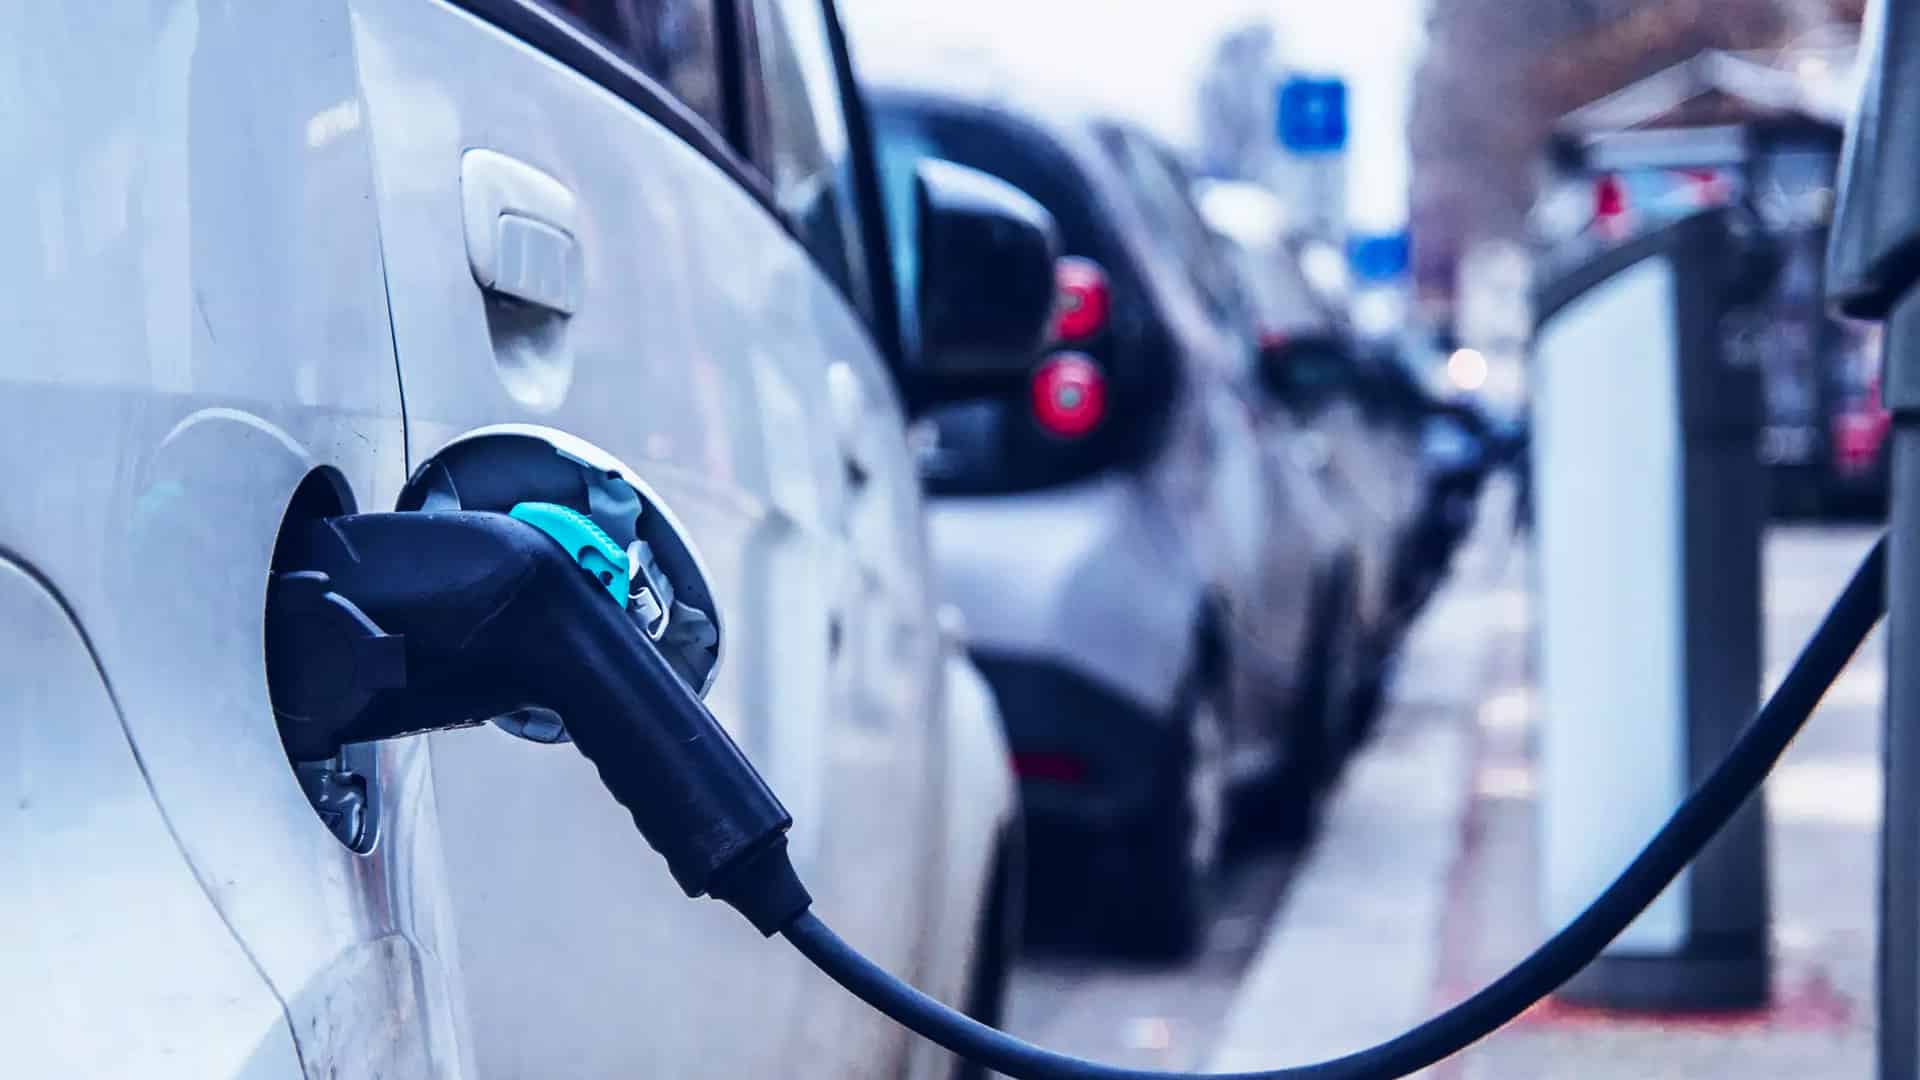 Greenie Energy To Raise $1 Million Funding To Expand Its Low-Cost Electric Vehicle Charging Solutions